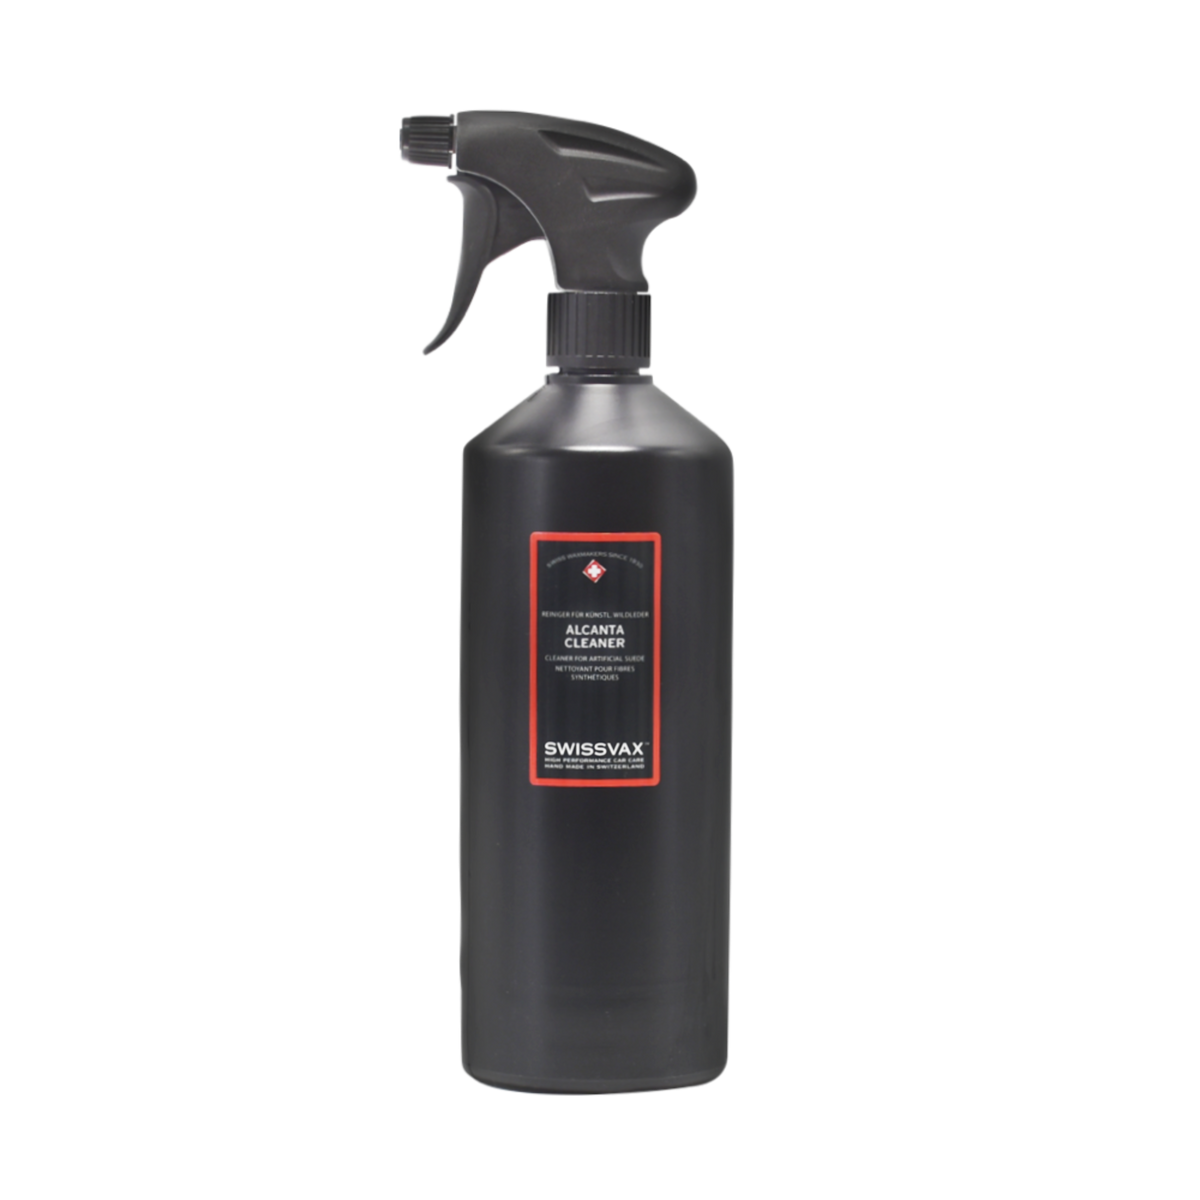 Alcantara and Upholstery Cleaner BMW, 300ml - 83122288907OE - Pro